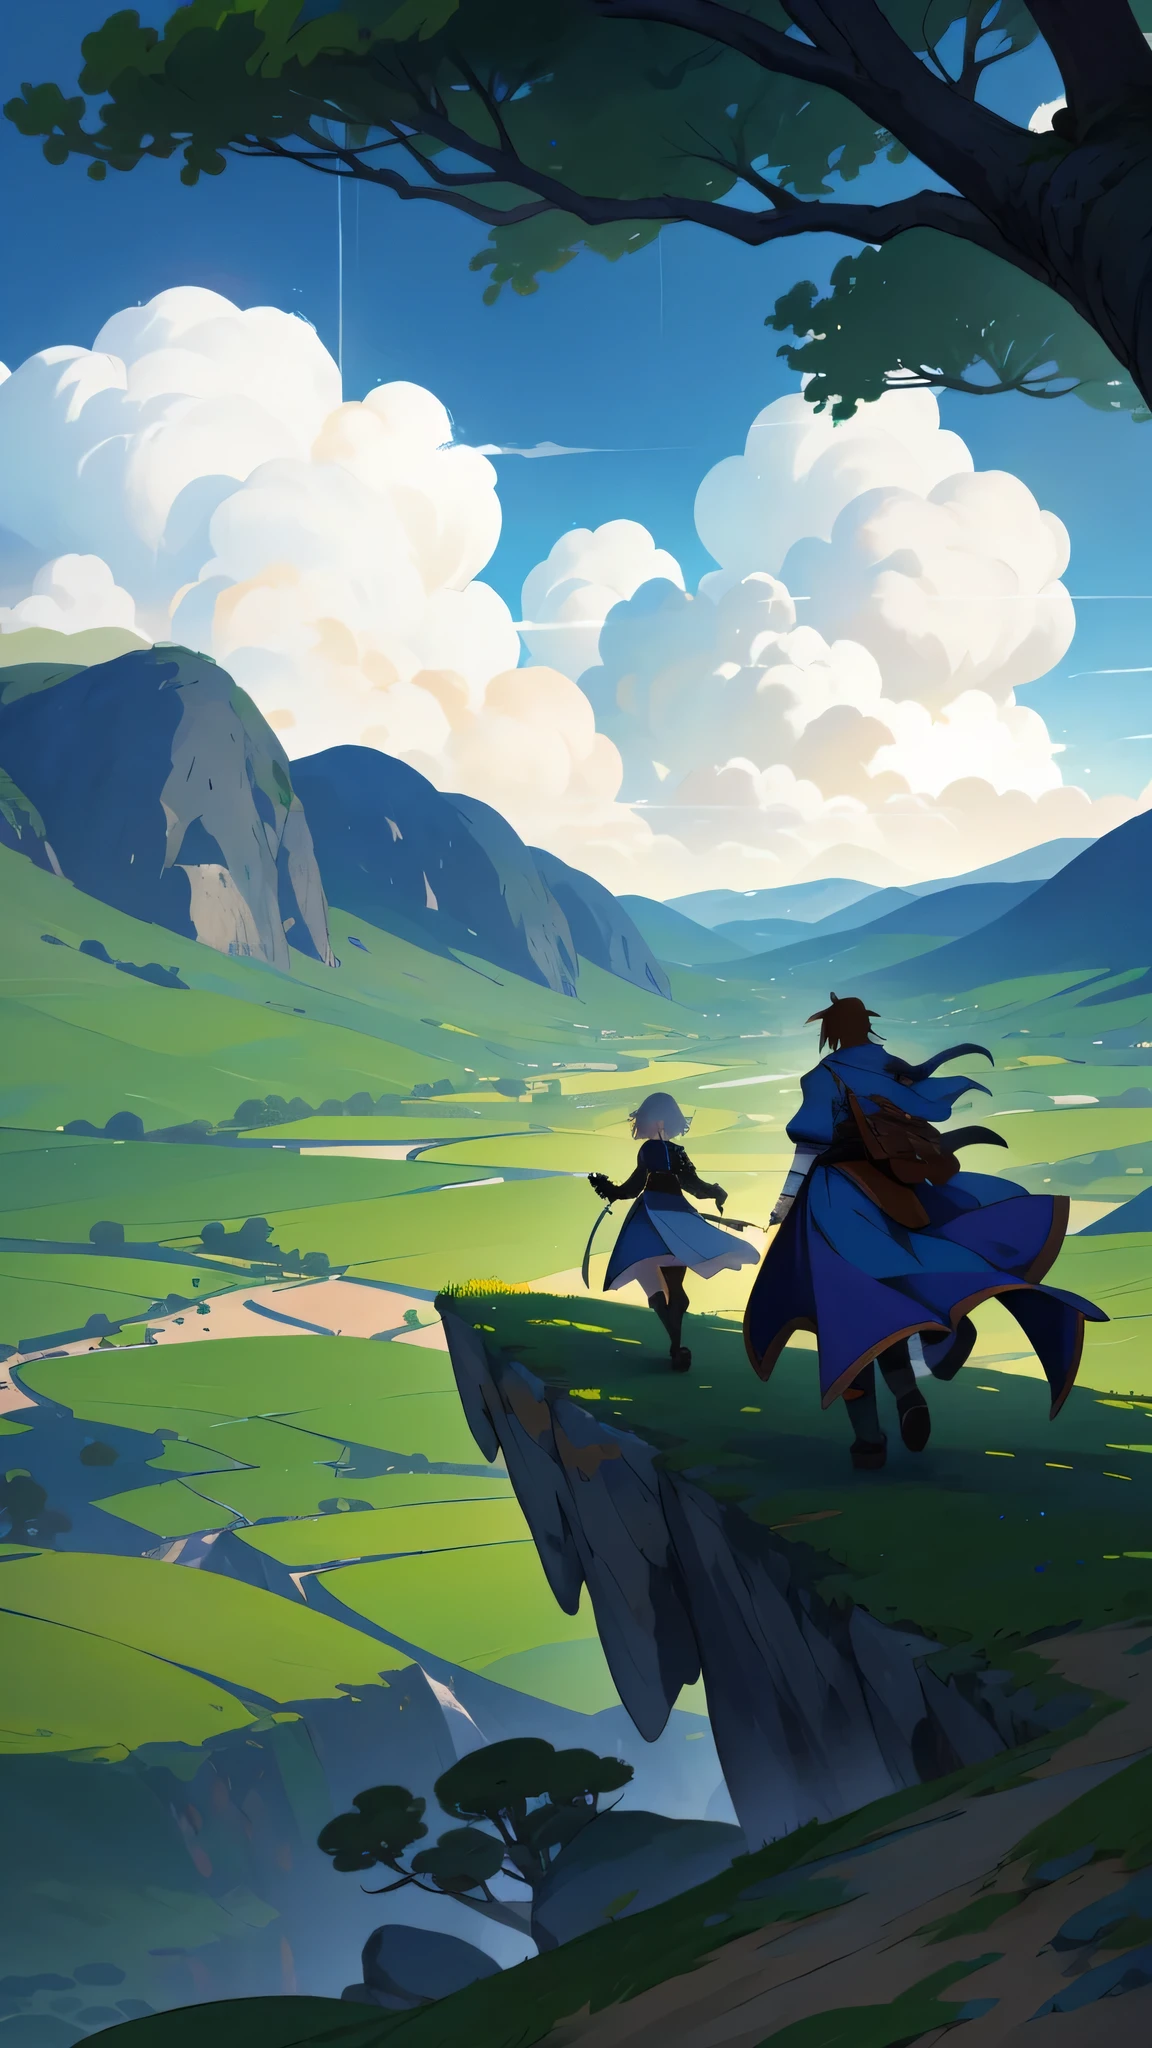 There is a cartoon picture，A man and a woman walking in the mountains, 2D concept art, RPG landscape, super giant game, Two-dimensional art, Two-dimensional art, 2d game fanart, game art!!, Magic fantasy 2D concept art, in an epic valley, Digital 2D Fantasy Art, fantasy game art style, game art